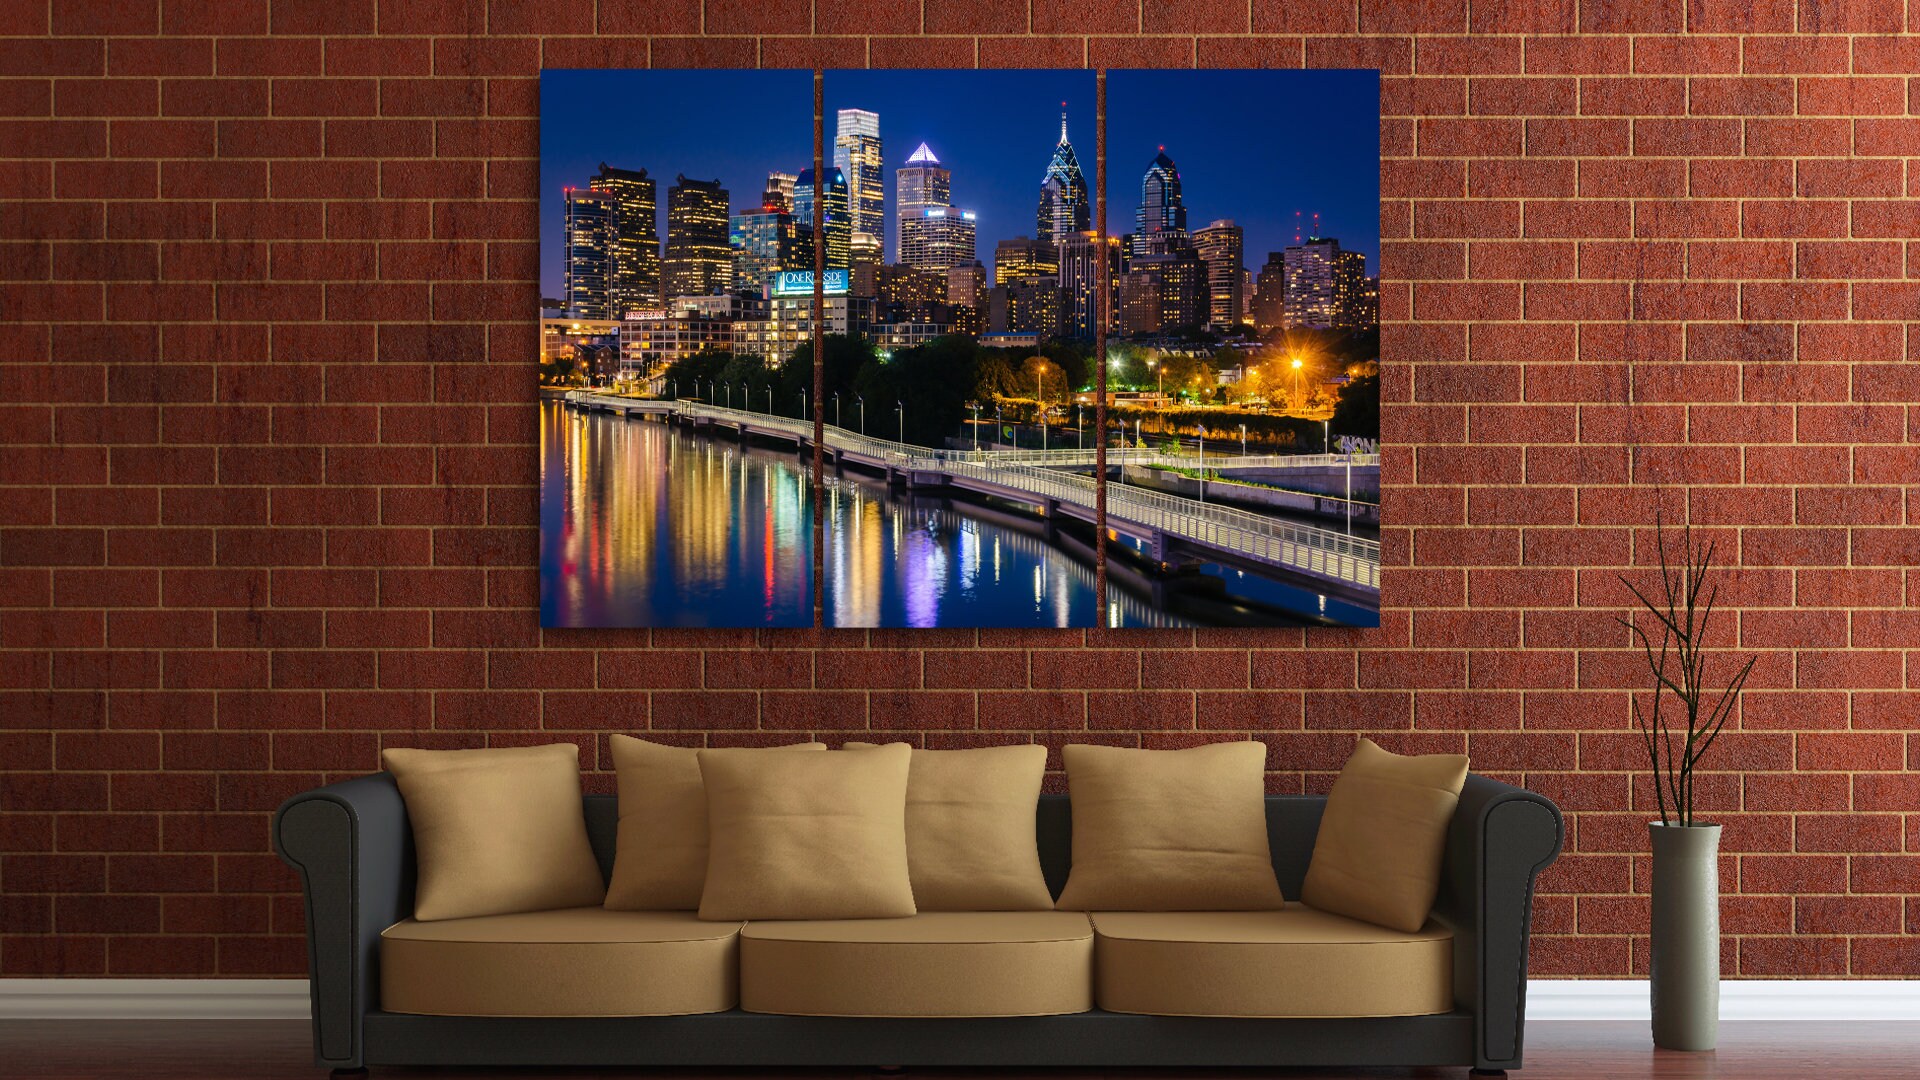 The Philadelphia Skyline And Schuylkill River Panorama at | Etsy